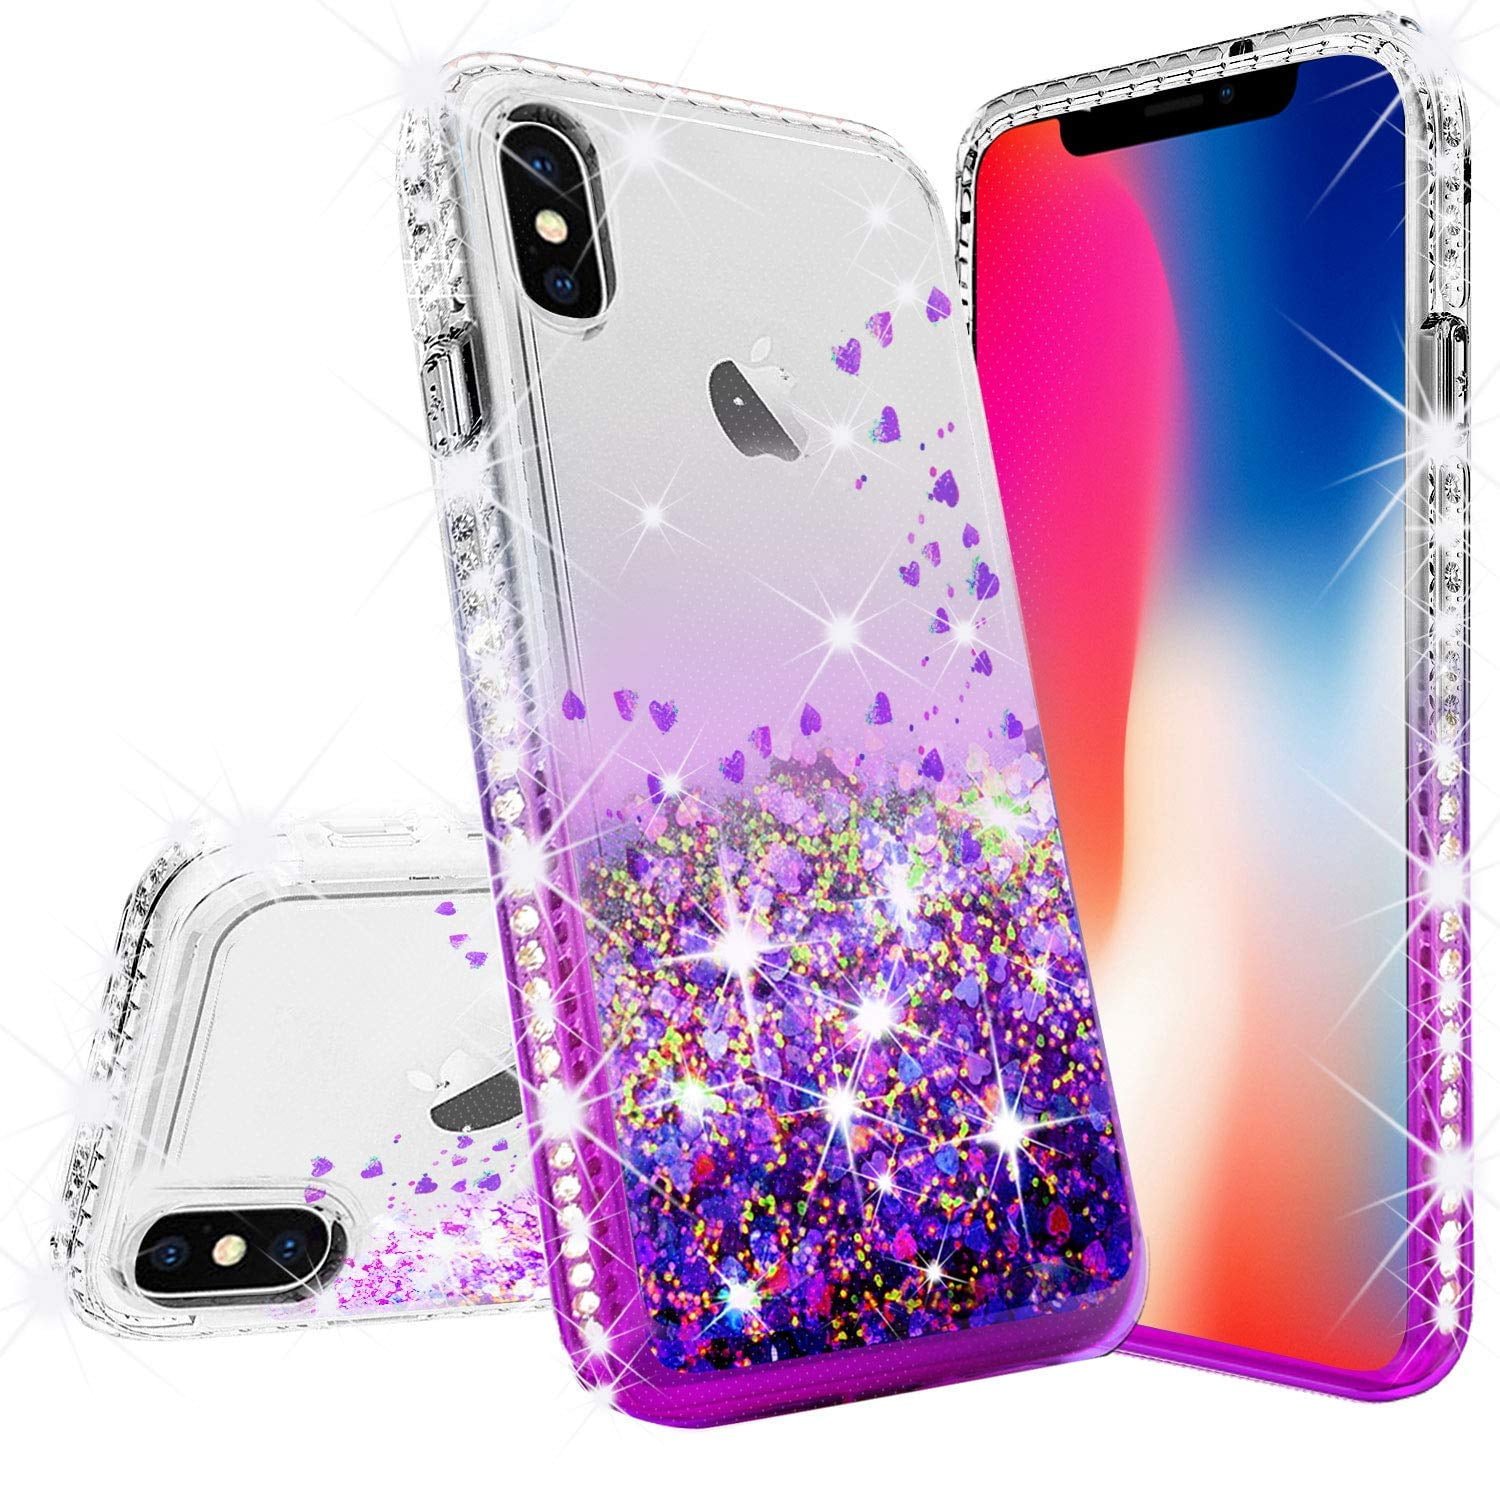 Sale > iphone xr case clear sparkle > in stock